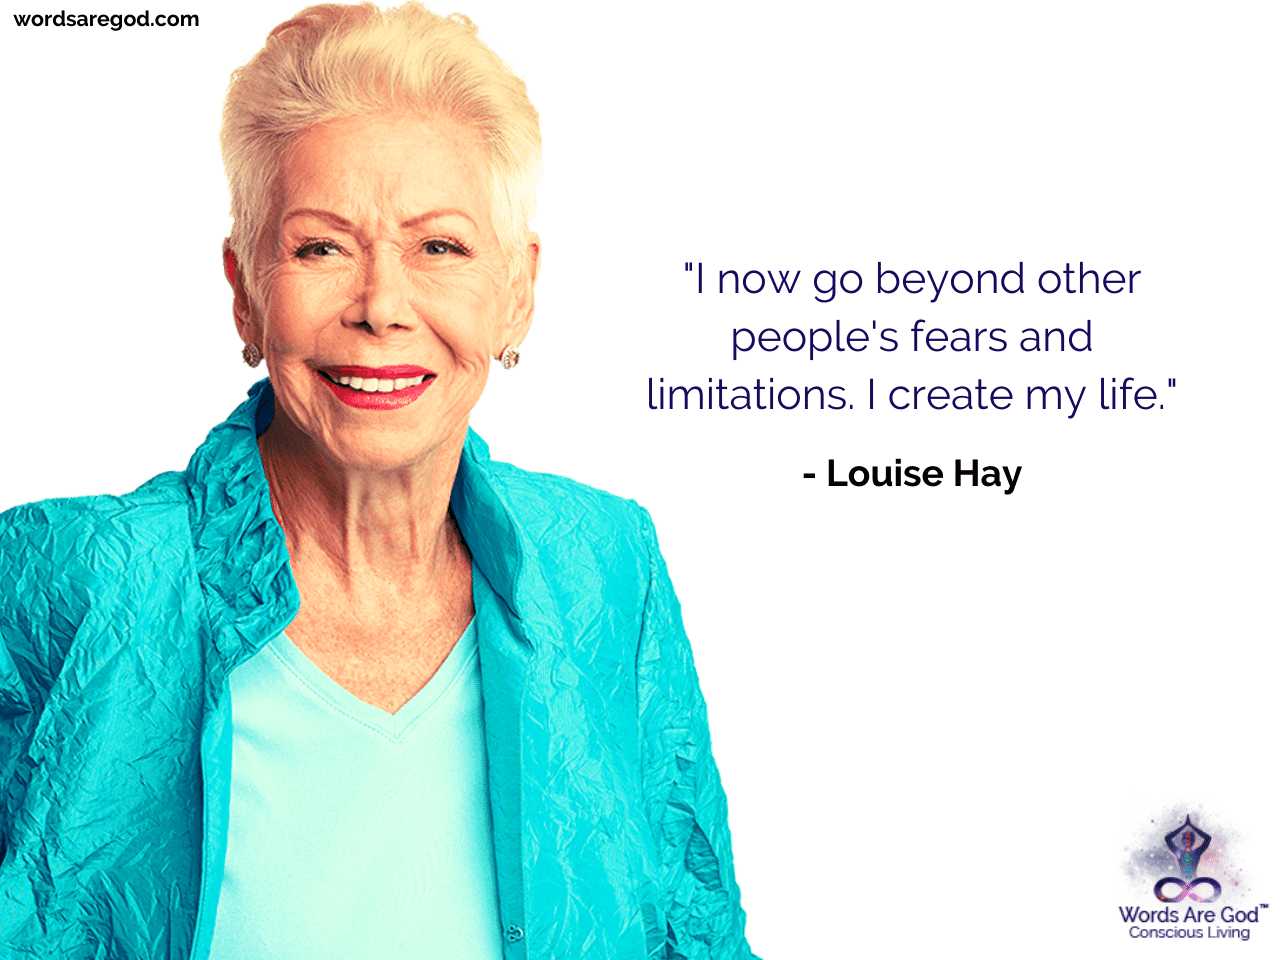 Louise Hay Best Quote by Louise Hay